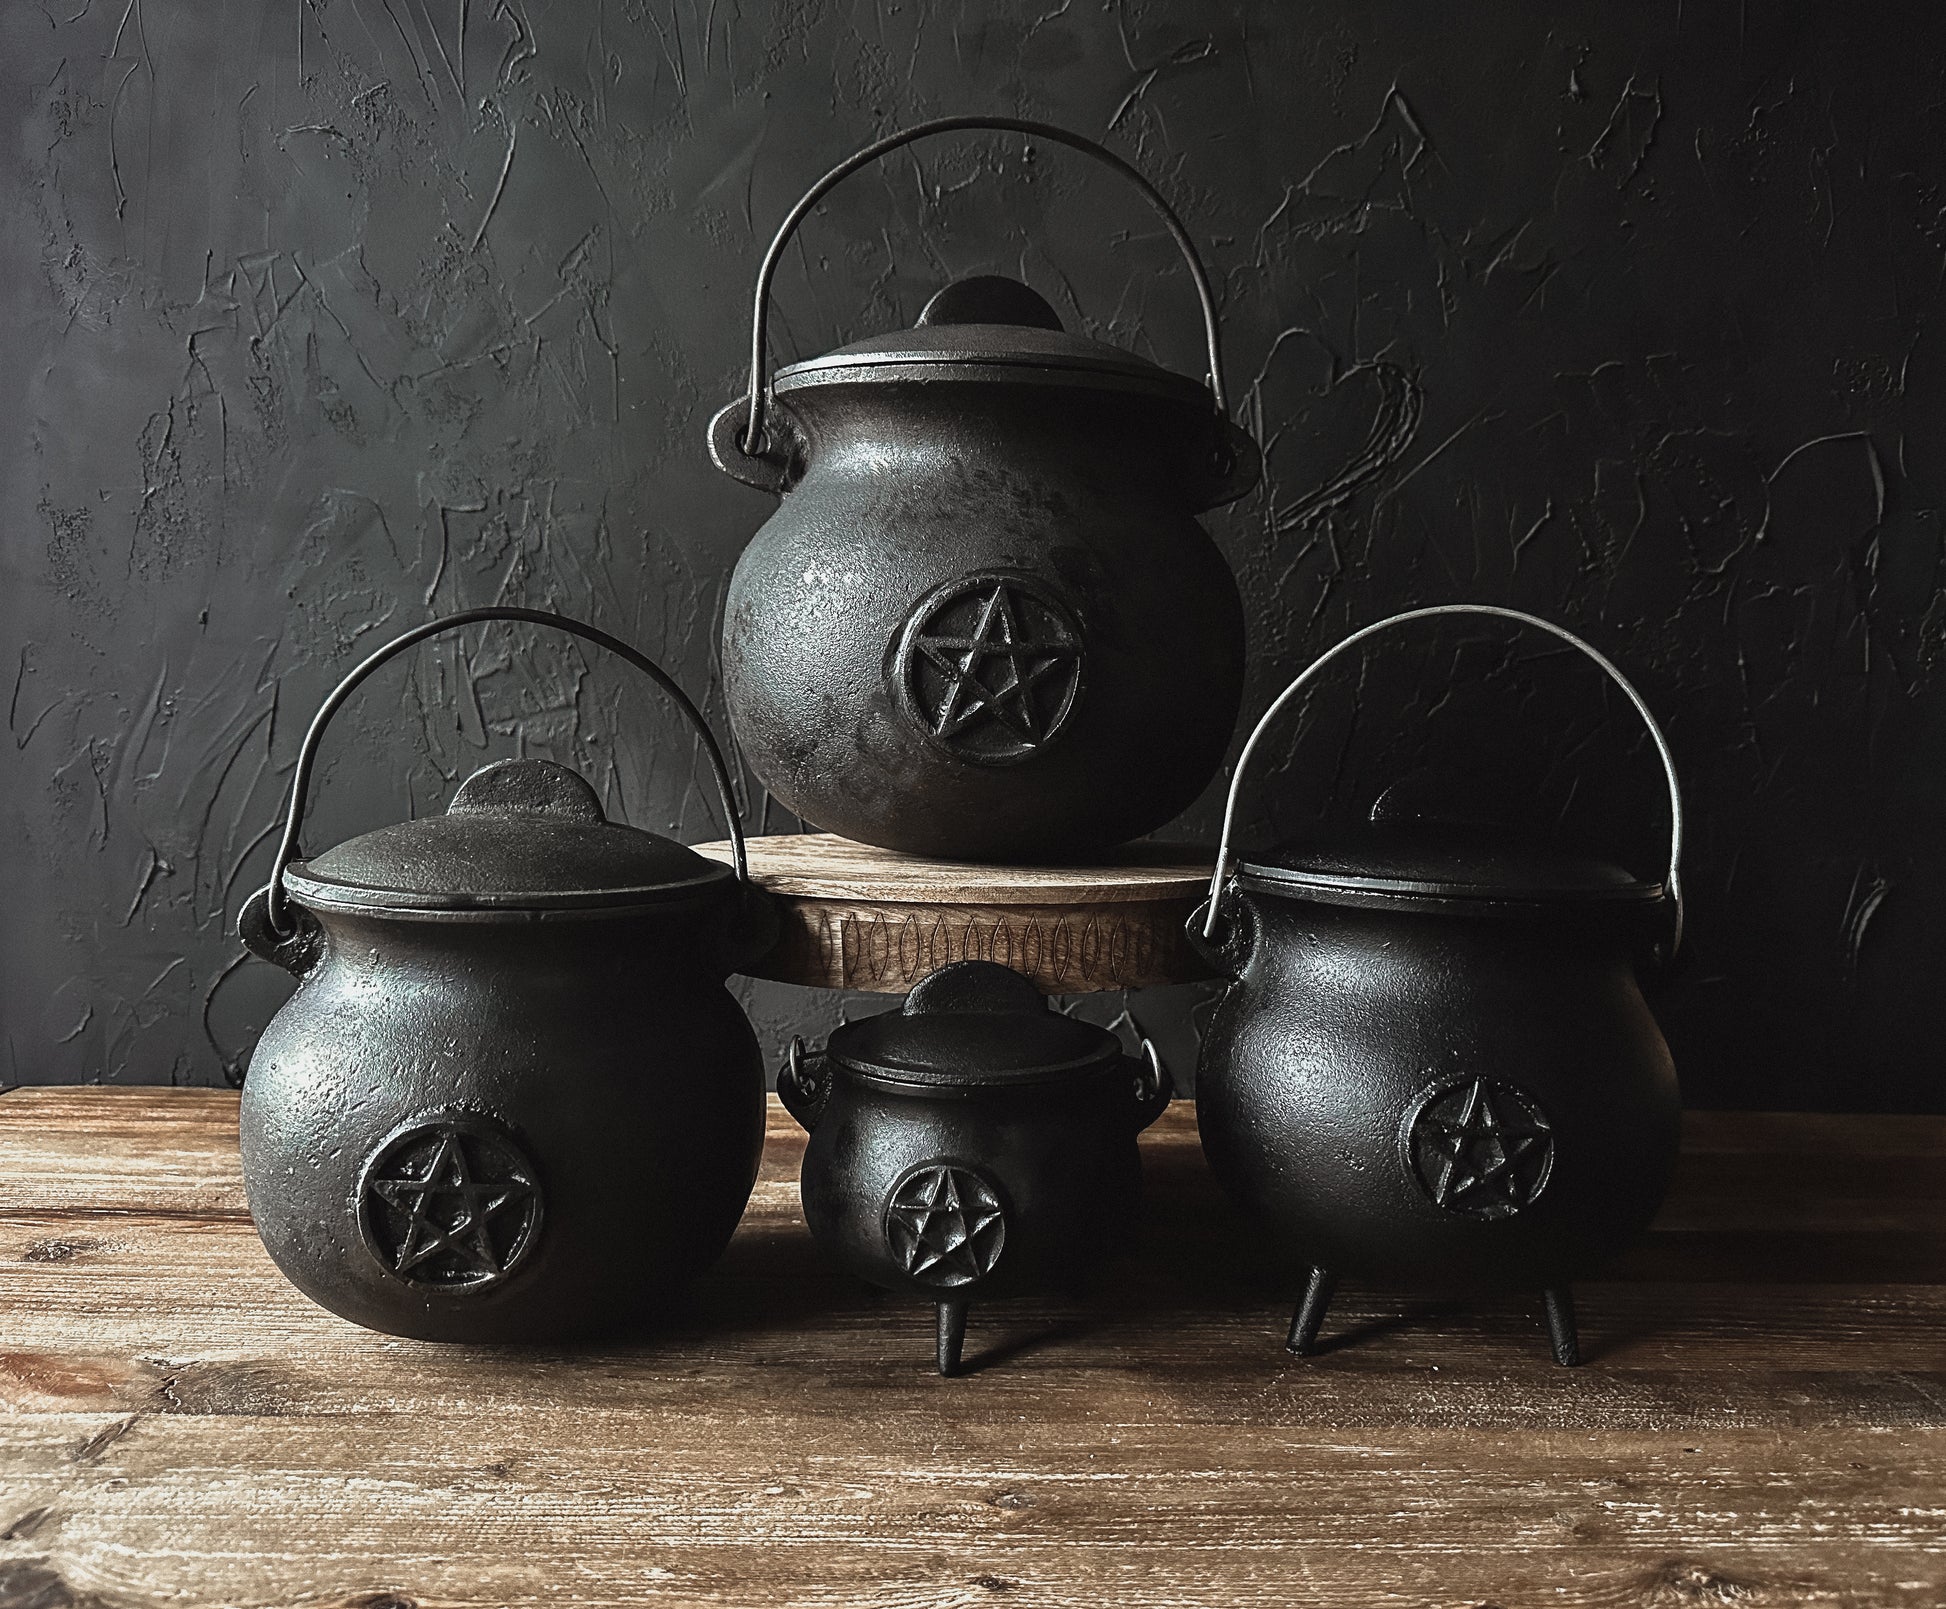 High-quality image showcasing  black cast iron cauldrons sold at The Stone Maidens. Ideal for brewing potions, burning herbs, and embracing your inner witchy vibes.